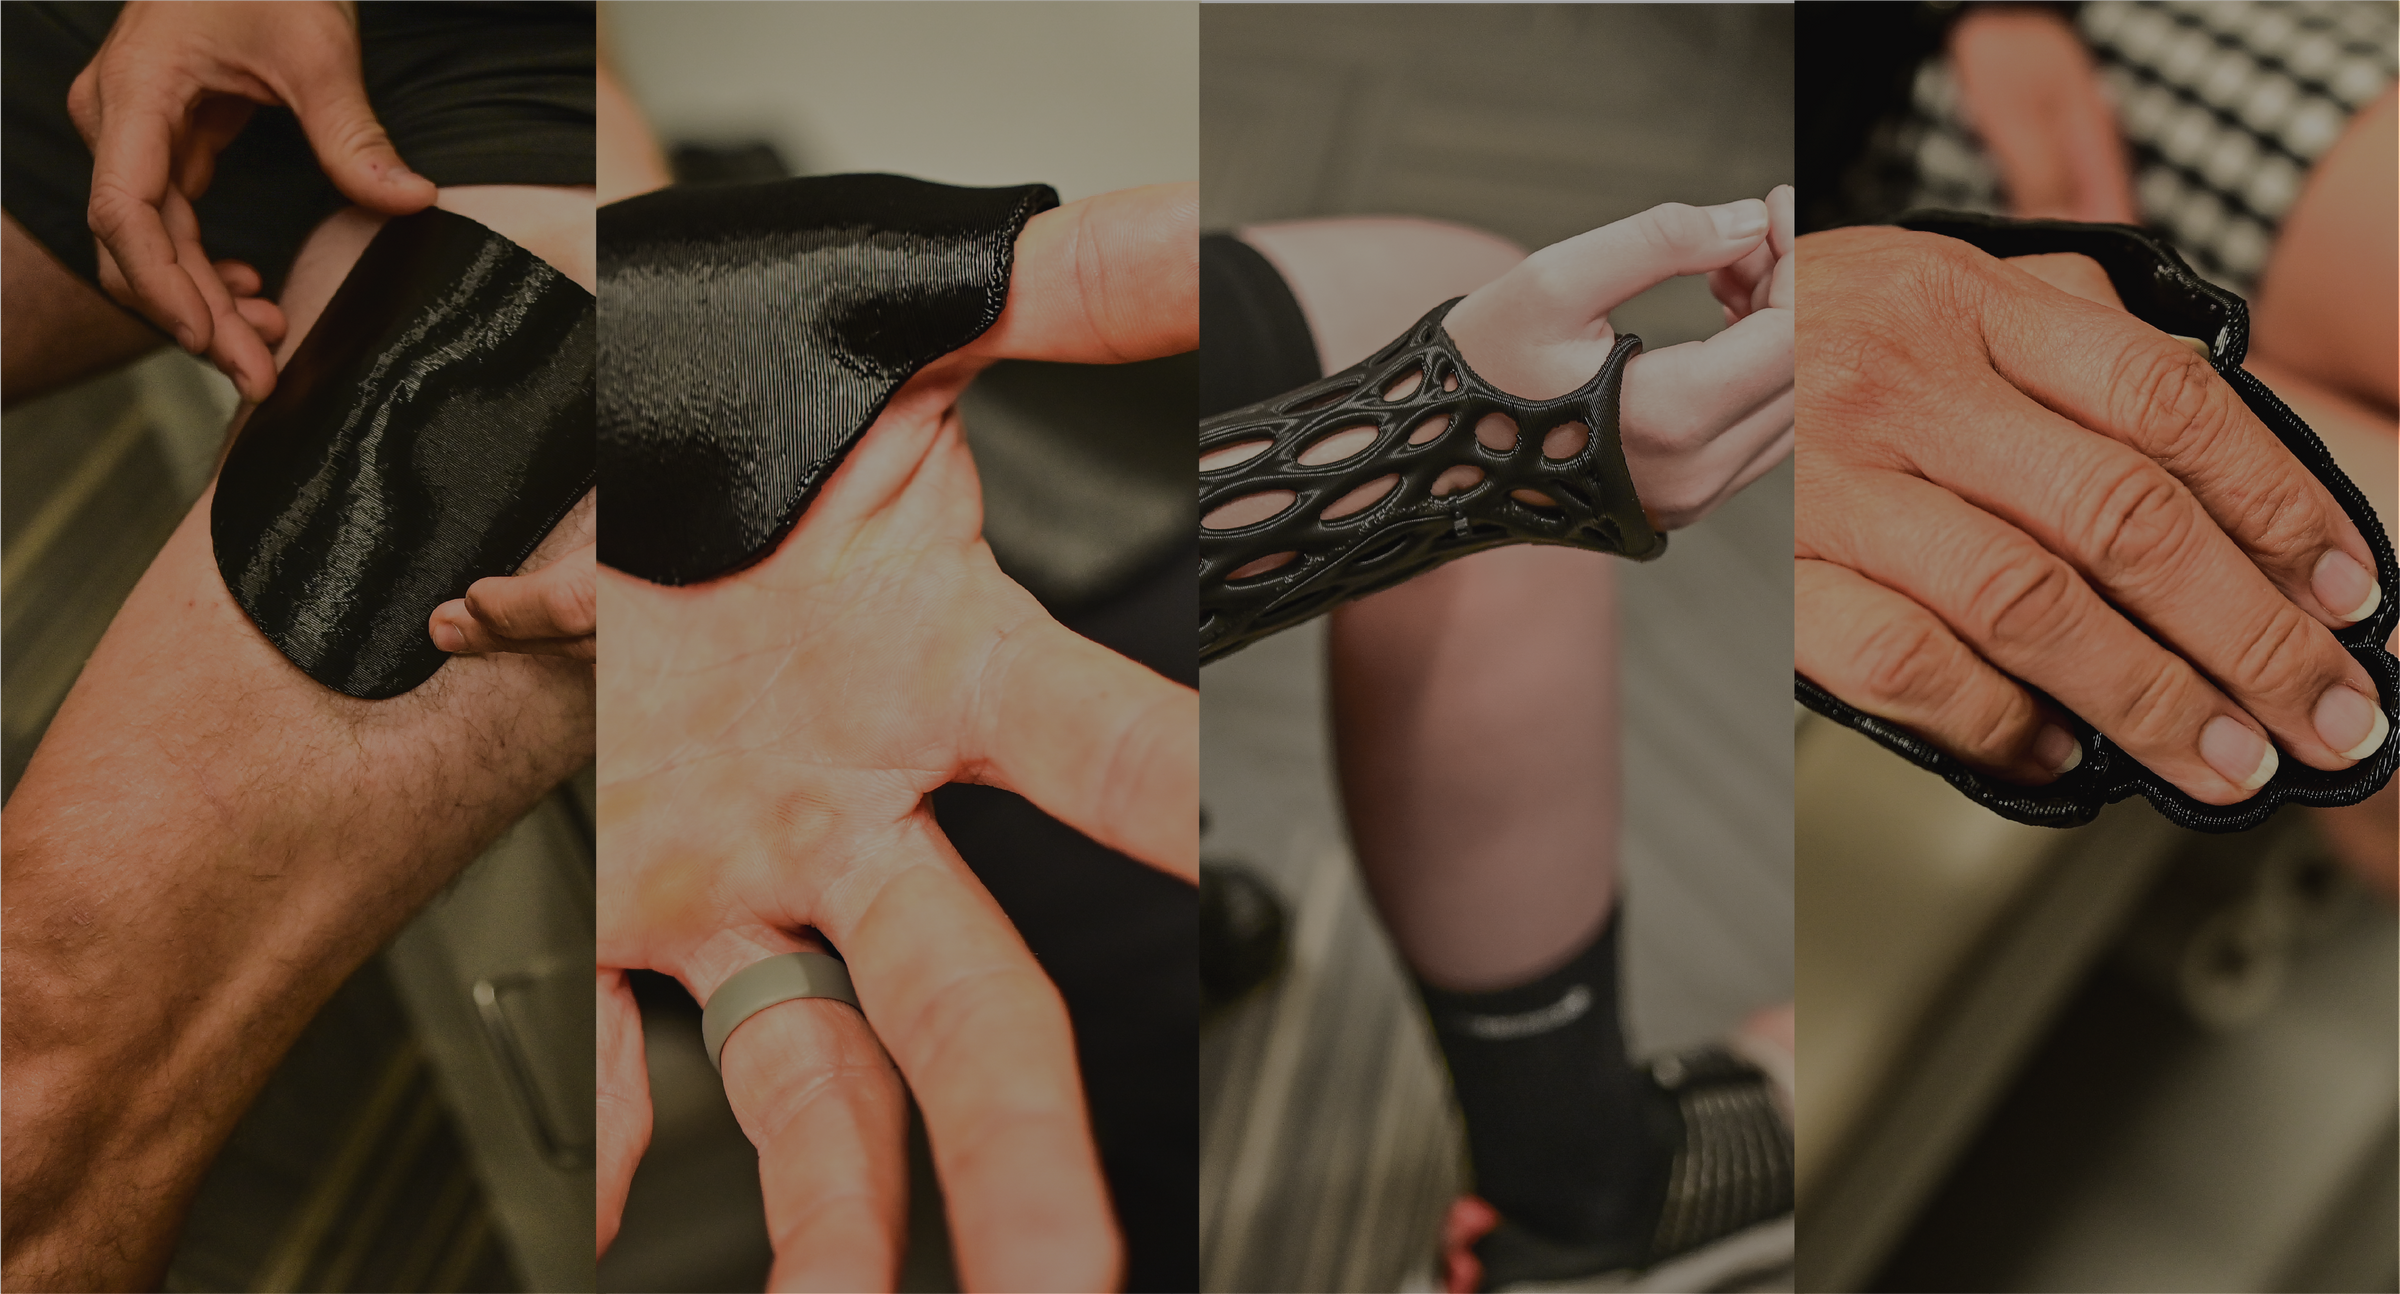 XO Armor's 3D printed guards, braces, and splints, showcasing custom-fit injury protection for various needs.